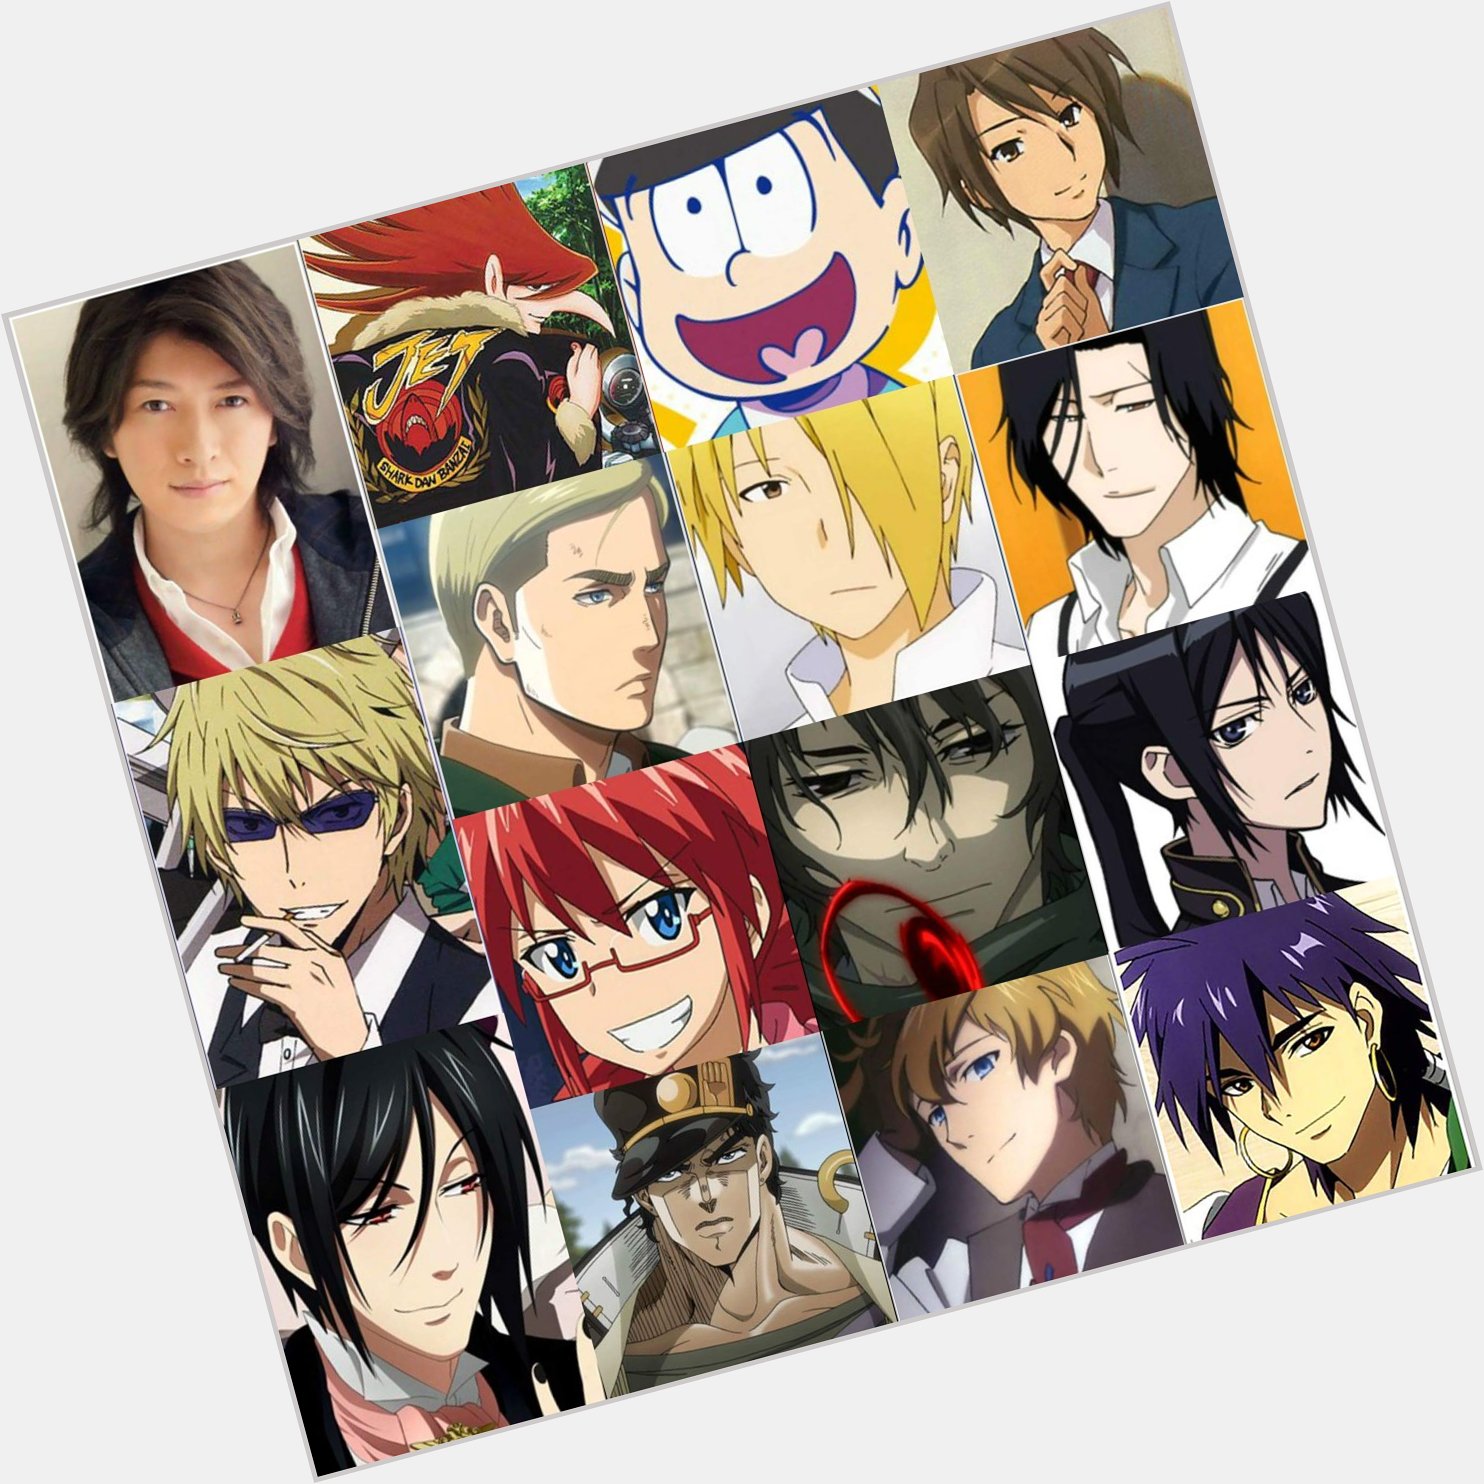  Wishing Happy Birthday to Daisuke Ono!
Thank you for your talented work! Image Credit: Crunchyroll 